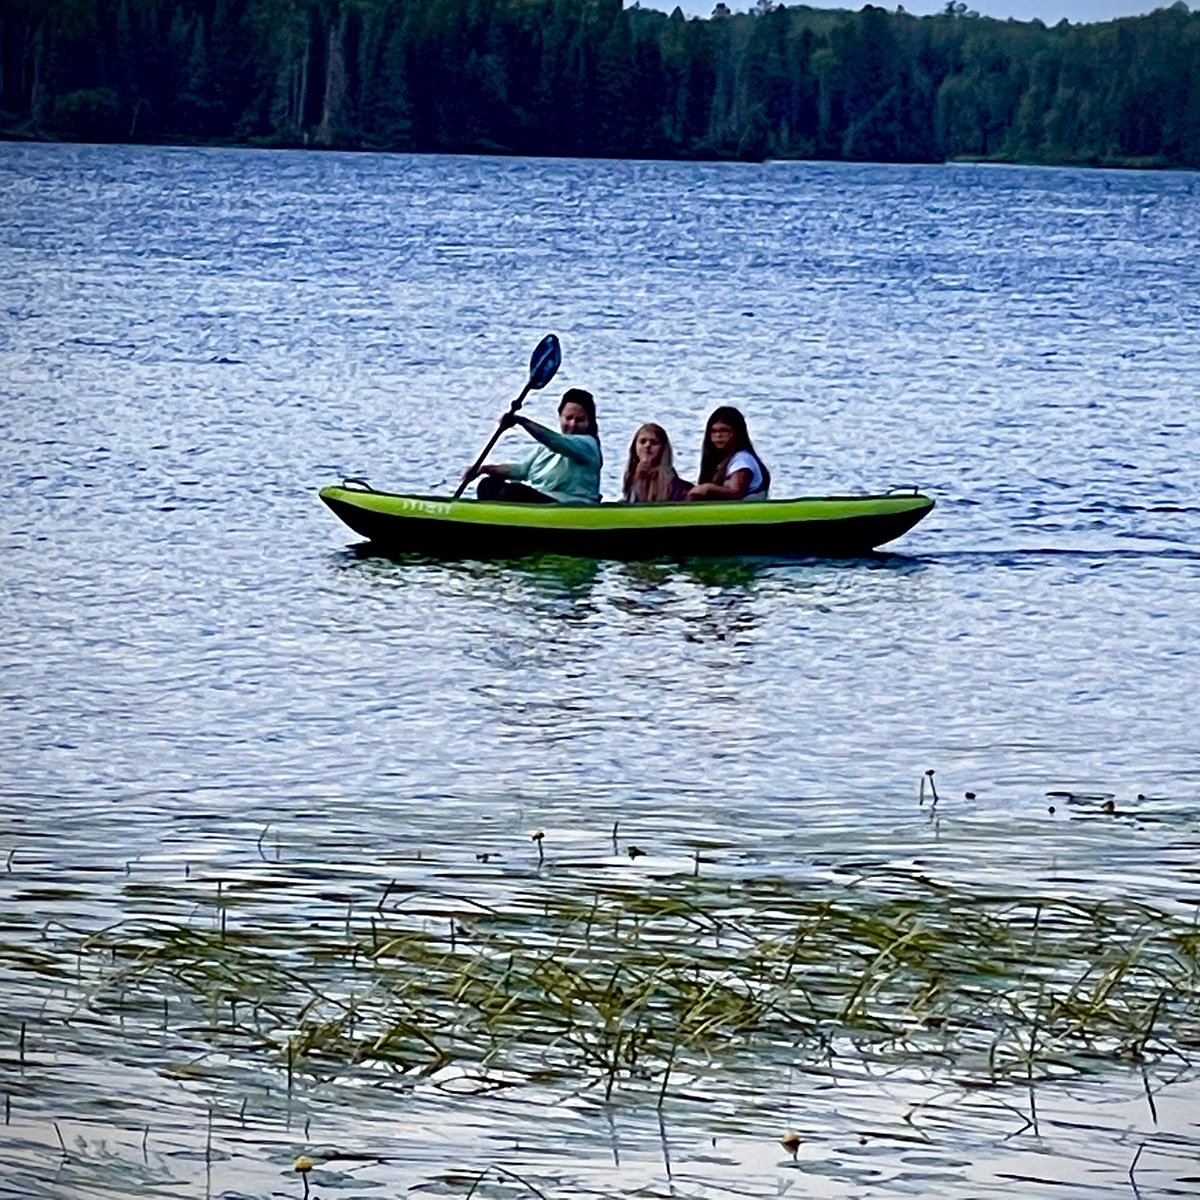 Rebecca in a kayak on Day Lake, taking two little girls for a ride.